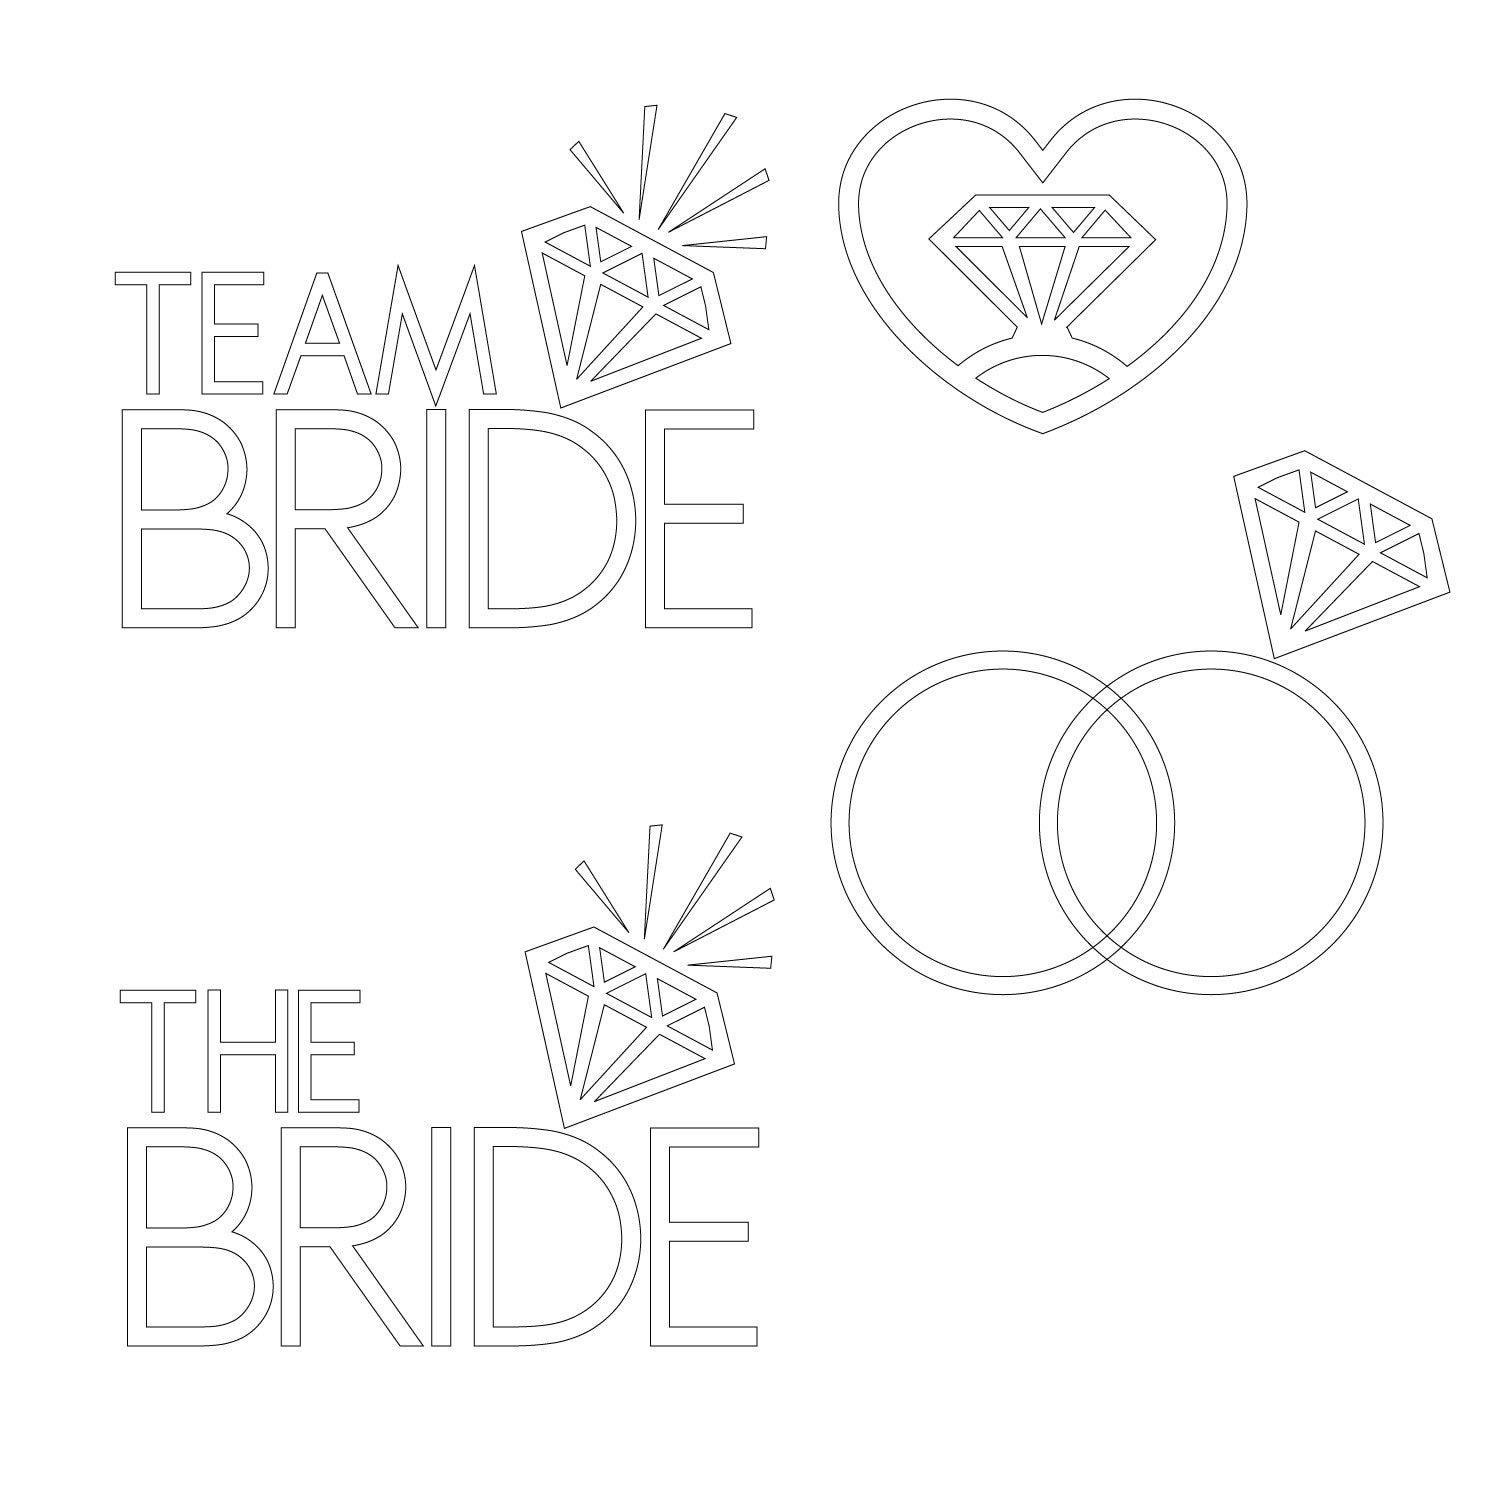 Download Team Bride, The Bride Wedding Rings - SVG - EPS - DXF & Png Files for print and cutting